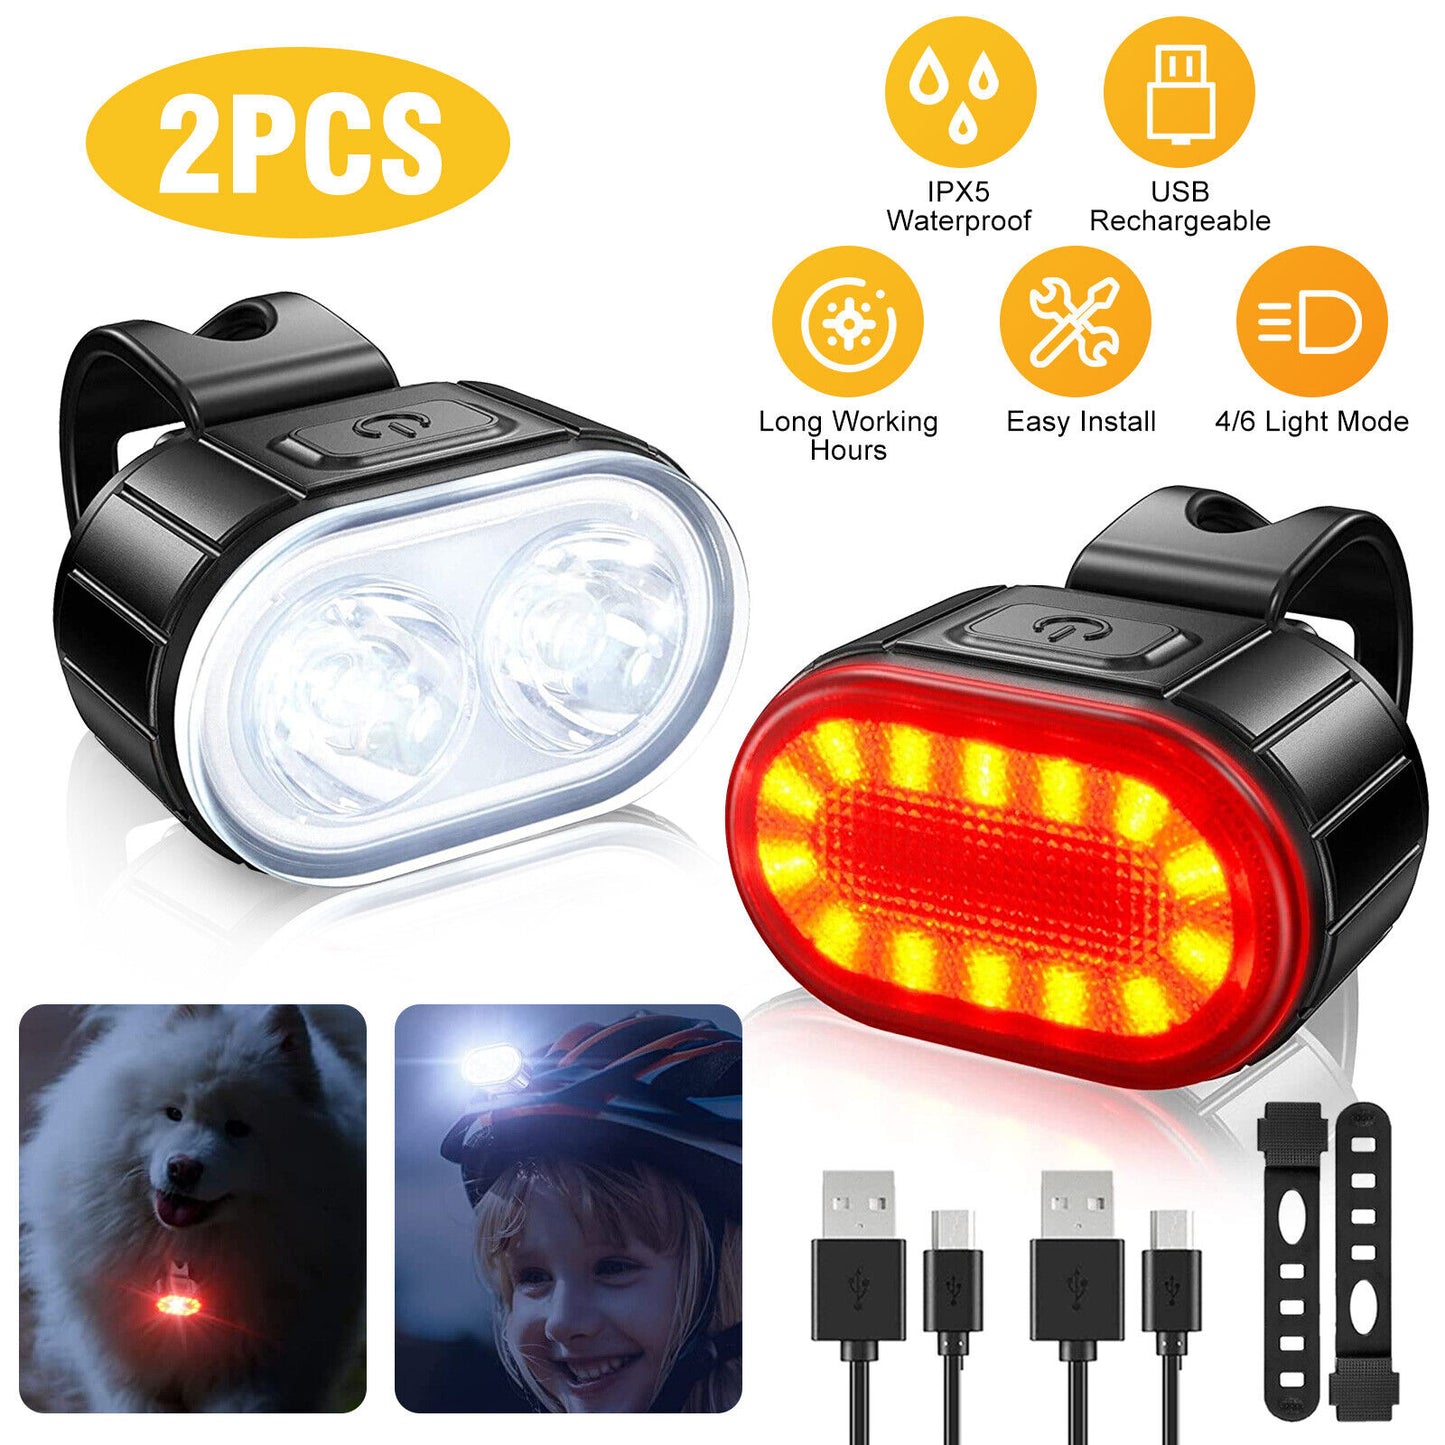 USB Rechargeable LED Bicycle Headlight Bike Front Rear Light Cycling Lamp Set